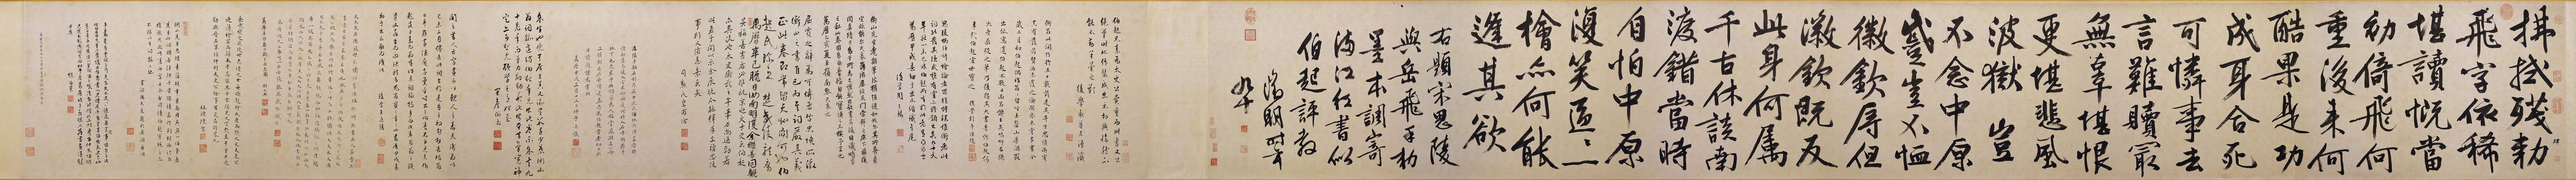 Wen Zhengming: Inscription for Gaozong's Imperial Order to Yue Fei